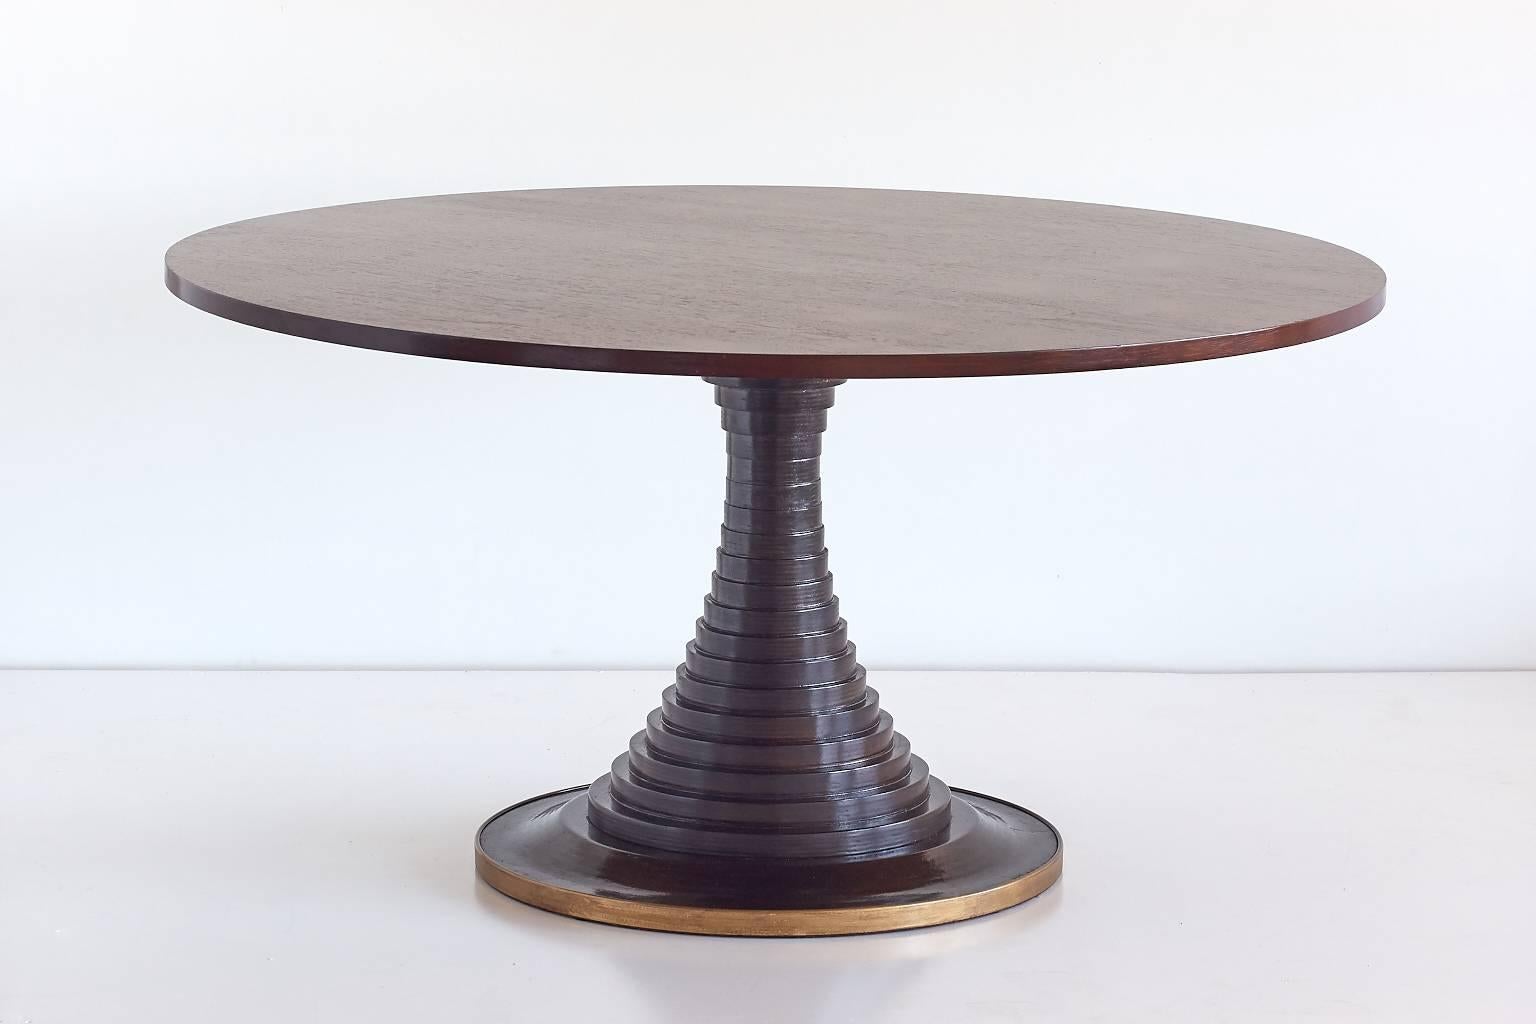 This rare and generously sized table was designed by Carlo de Carli and produced by Sormani in 1963. The beautiful top made of teak stands on a striking base made of solid wooden discs, with a circular brass trim detail. The elegant "Model